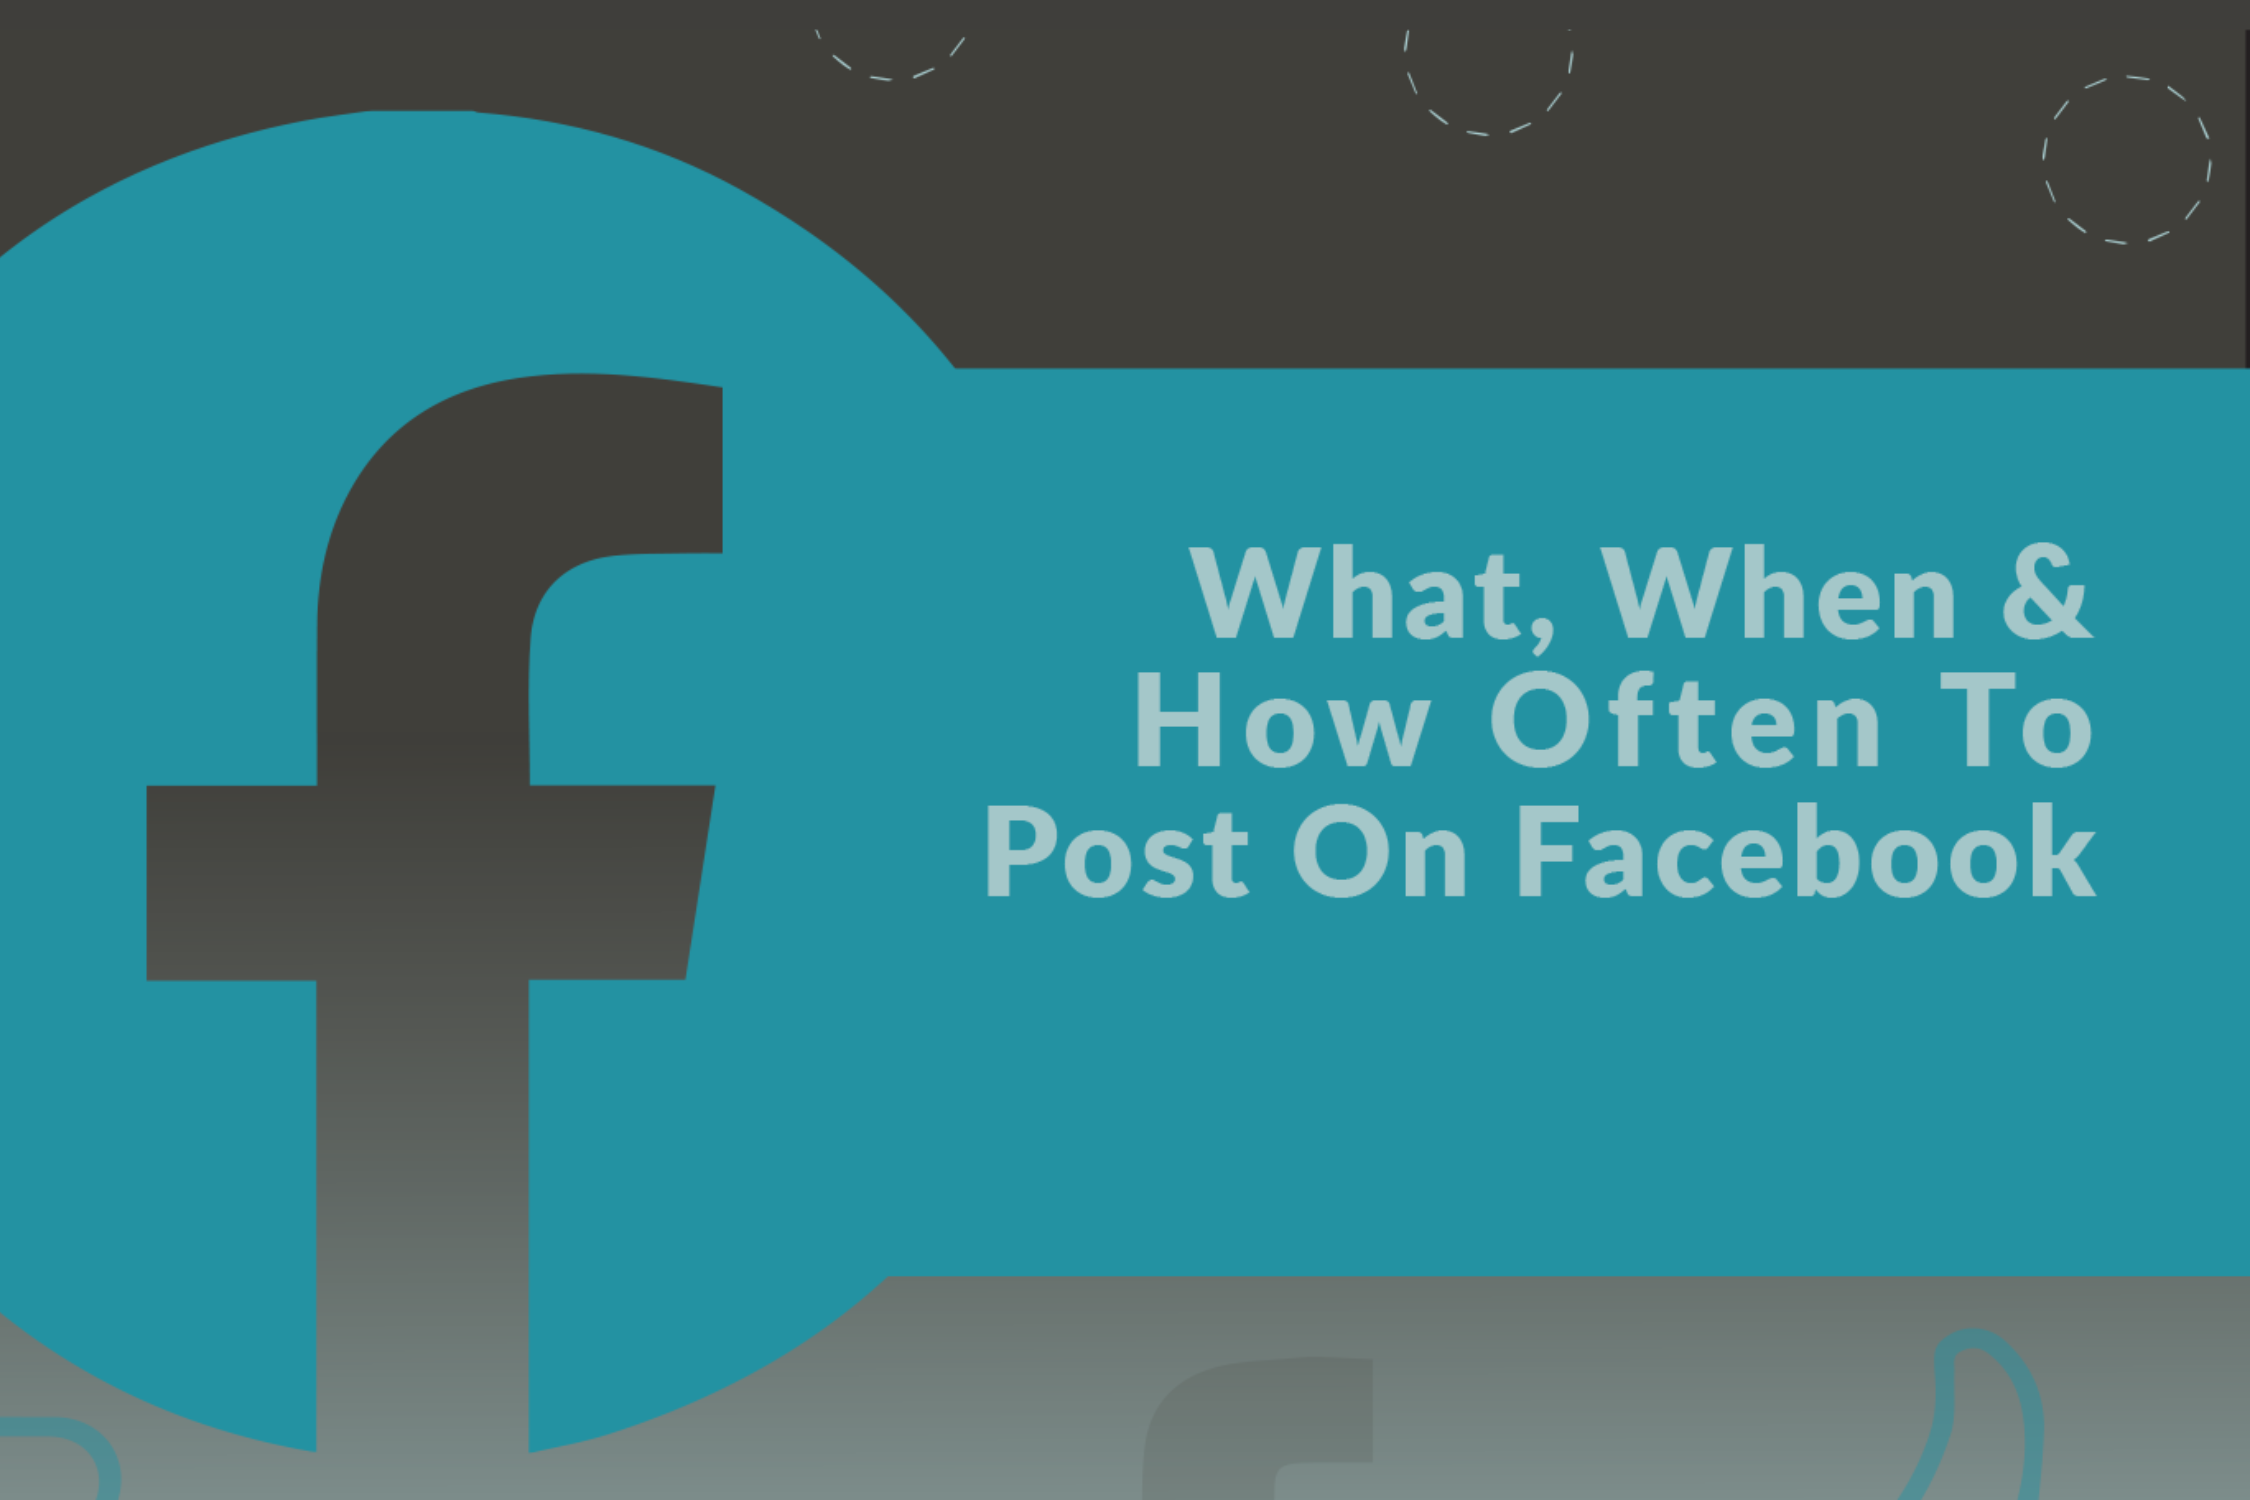 Facebook For Business Guide: What, When & How Often To Post (infographic)